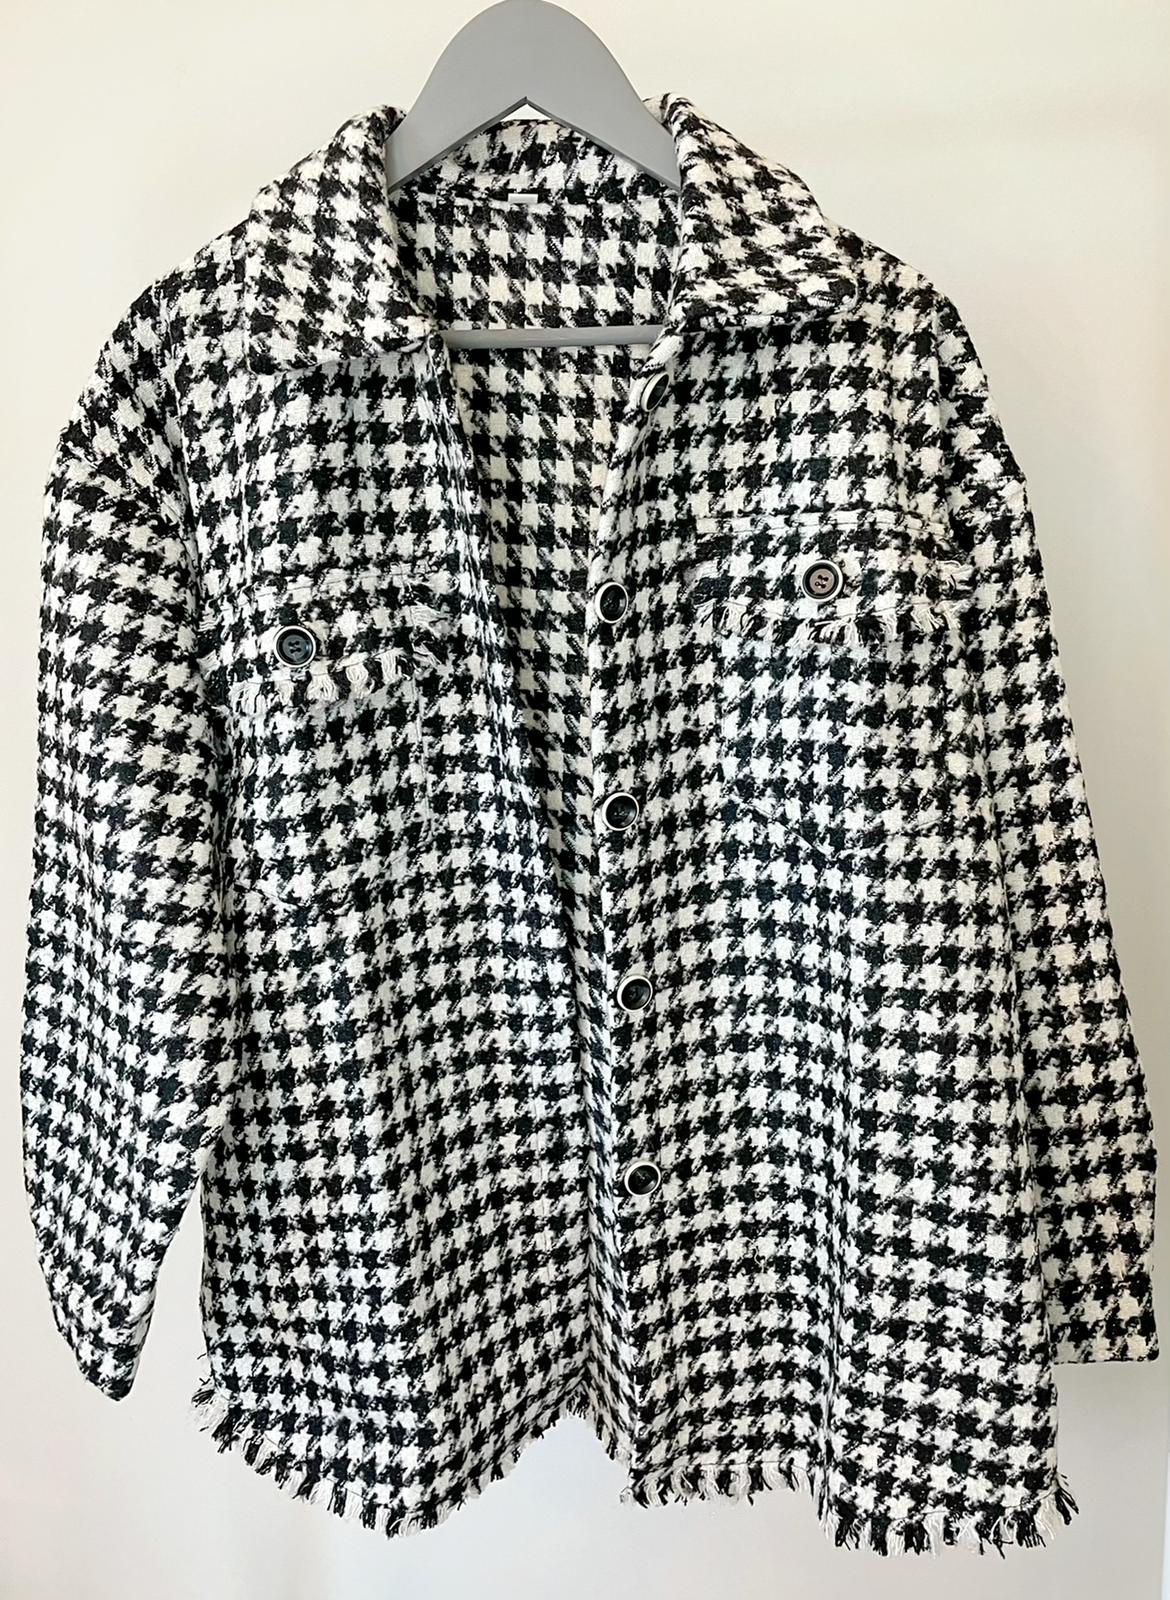 Black and White Dogstooth Print Shacket